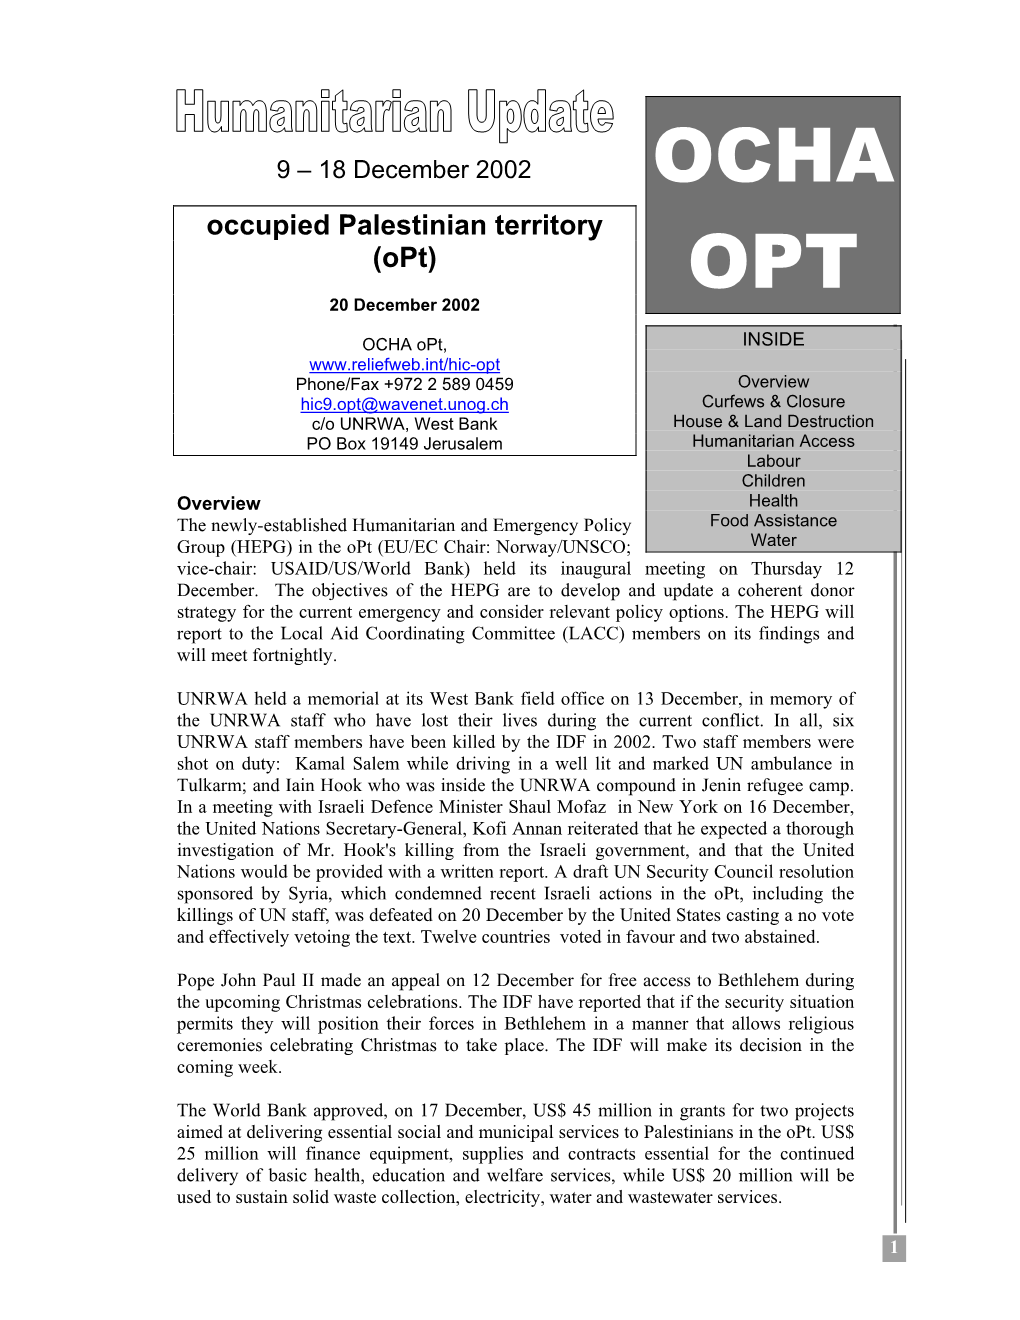 Occupied Palestinian Territory (Opt) OPT 20 December 2002